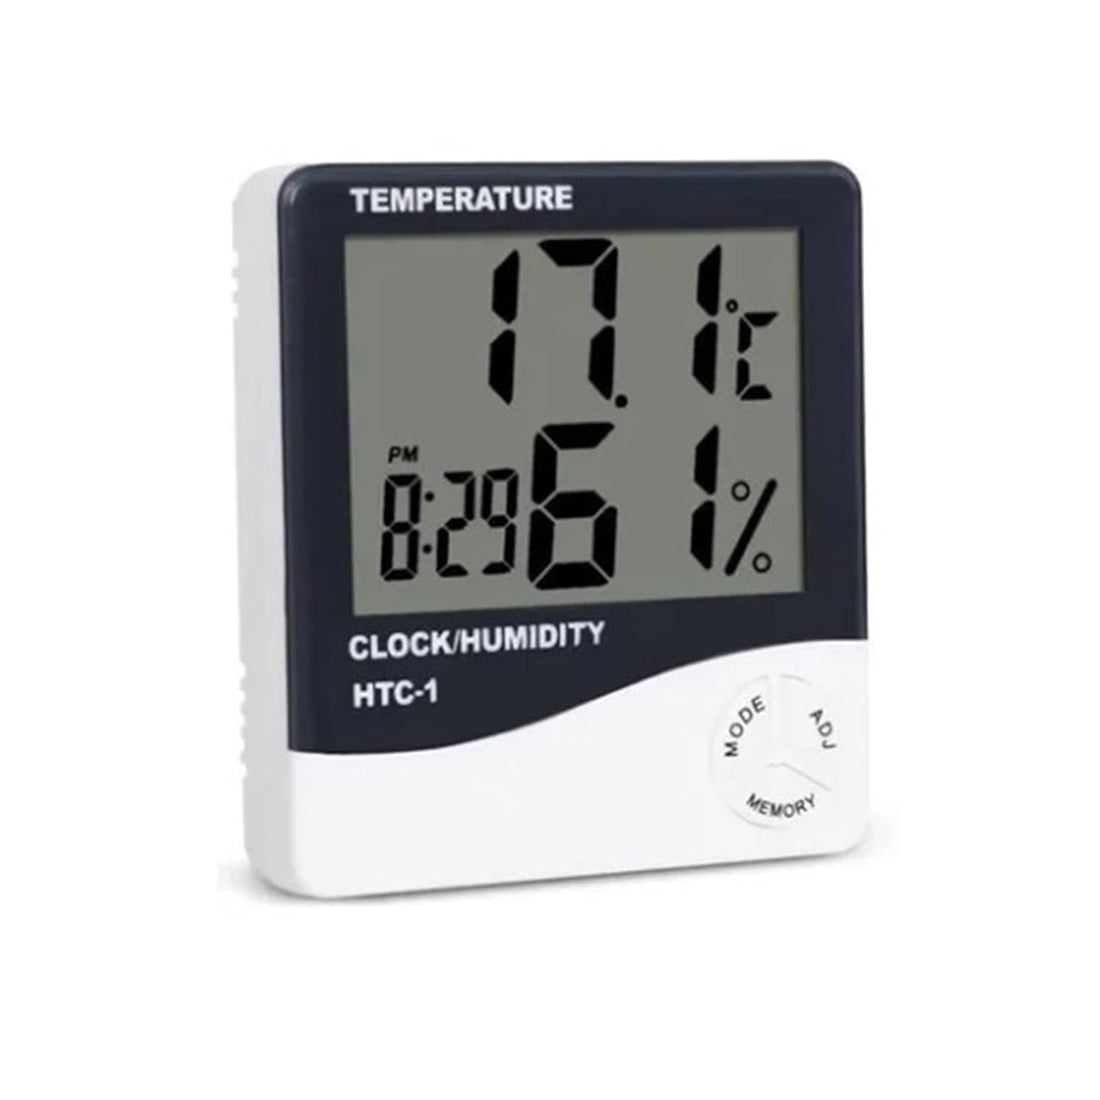 Mini Small Digital Hygrometer Thermometer Indoor, Accurate Humidity Meter Temperature Sensor for Home, Bedroom, Baby Room, Office, Greenhouse, Cellar